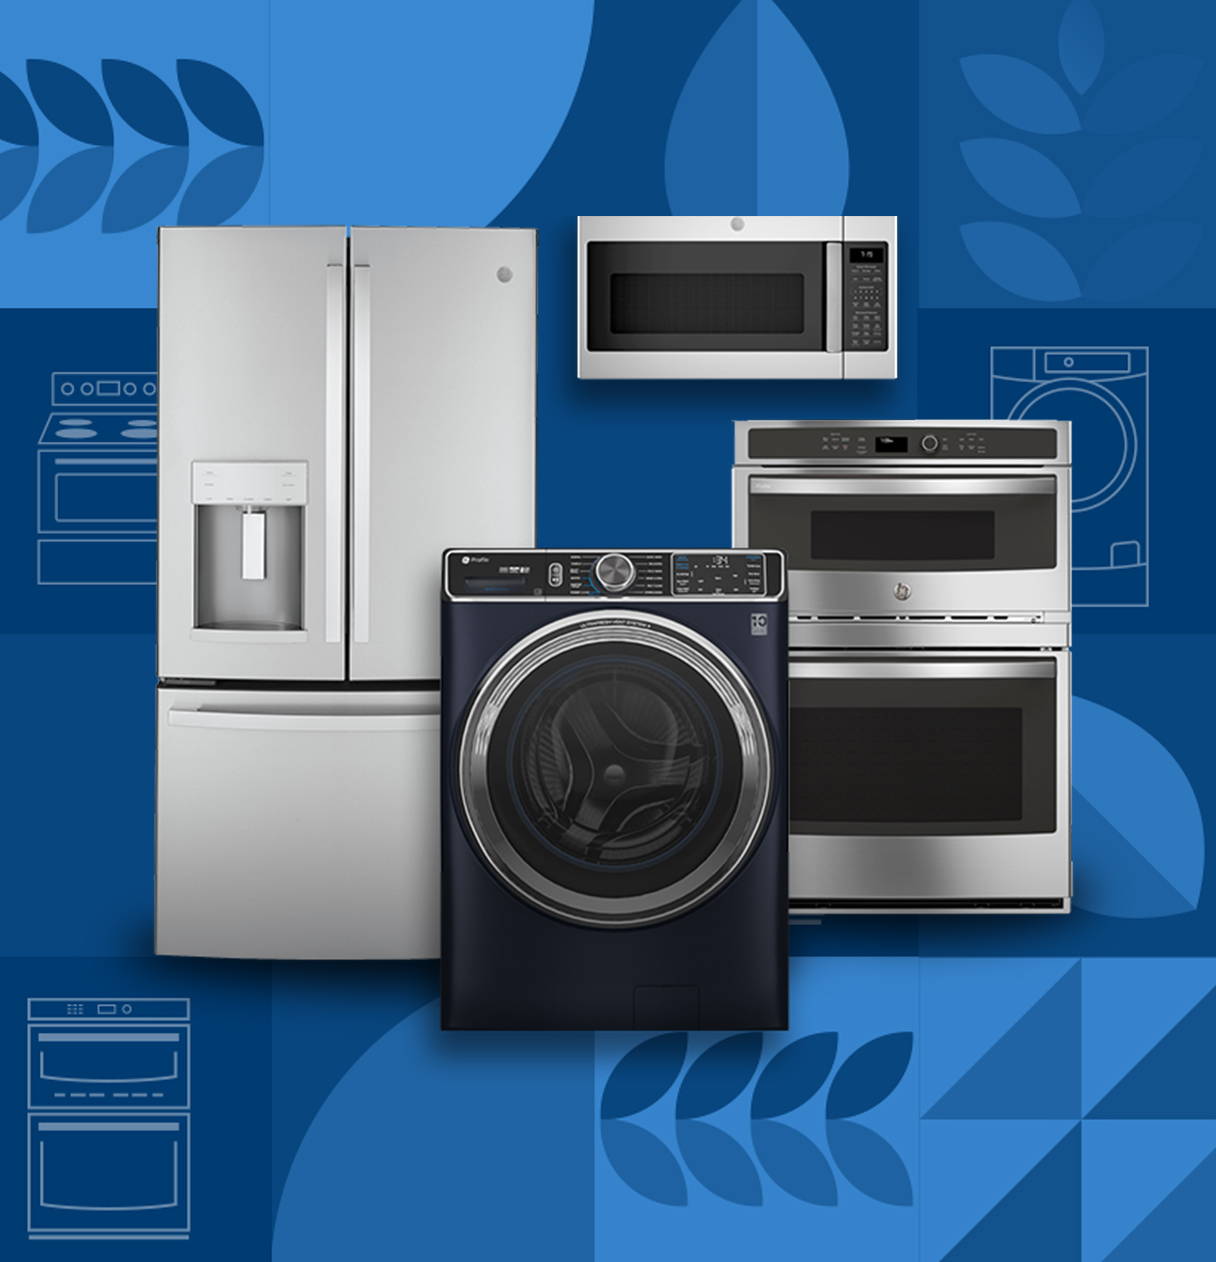 Save up to 35% OFF select major appliances